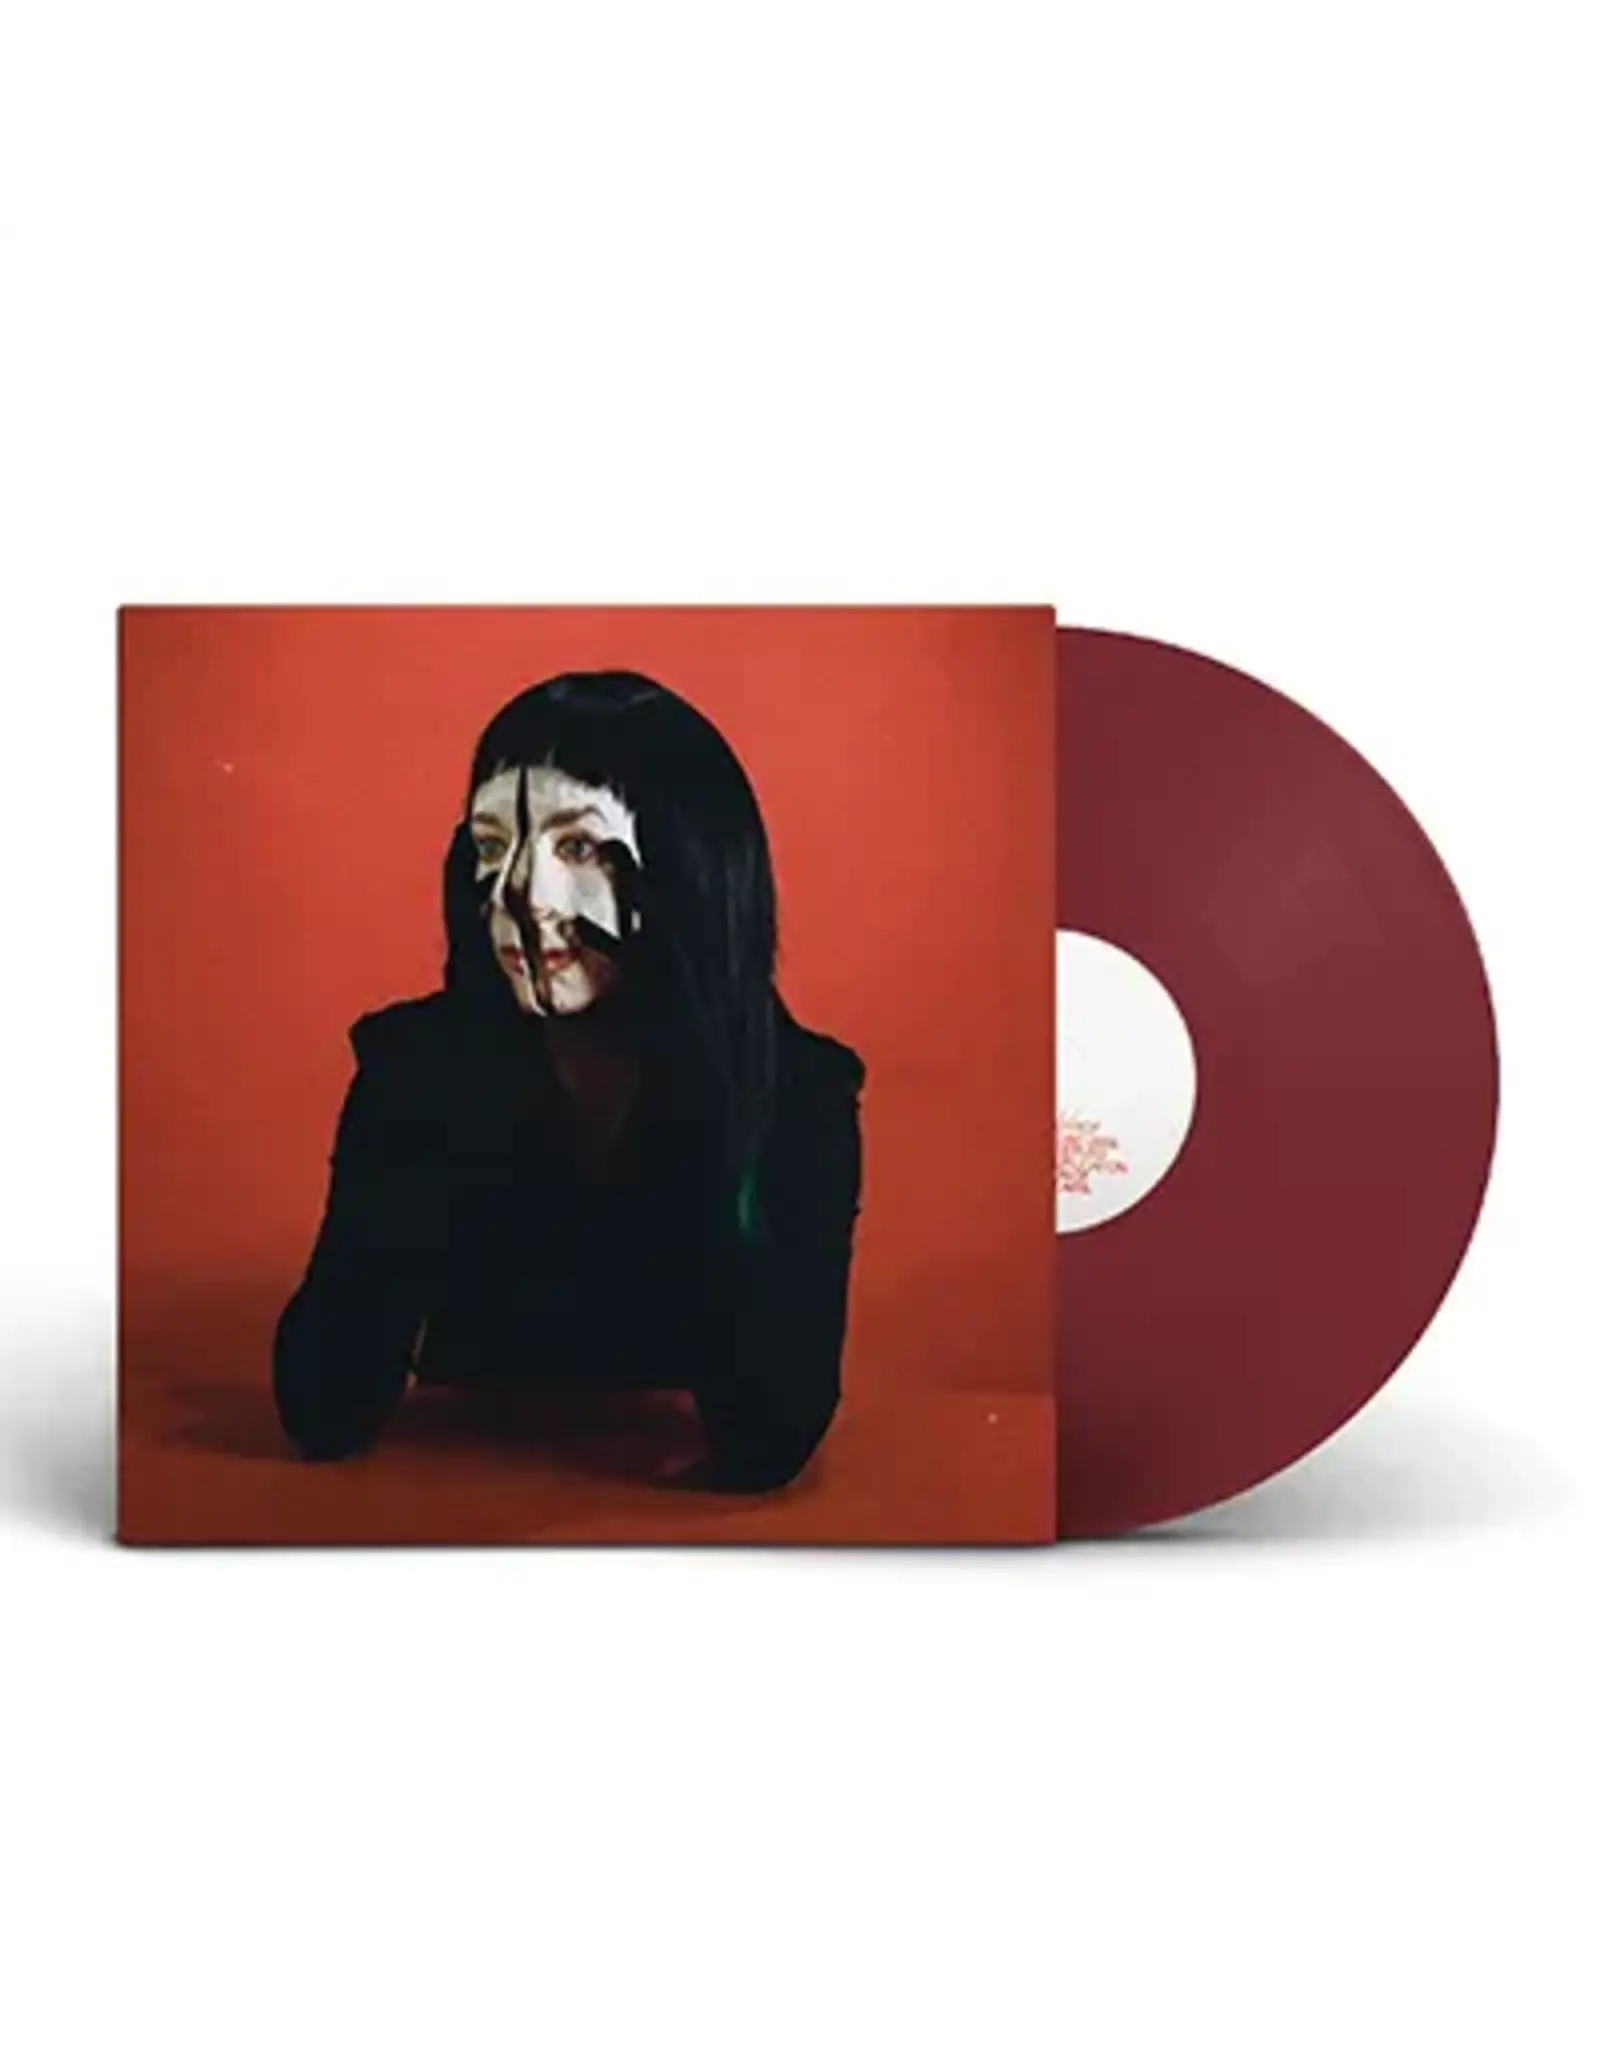 Allie X - Girl With No Face (Oxblood Vinyl)